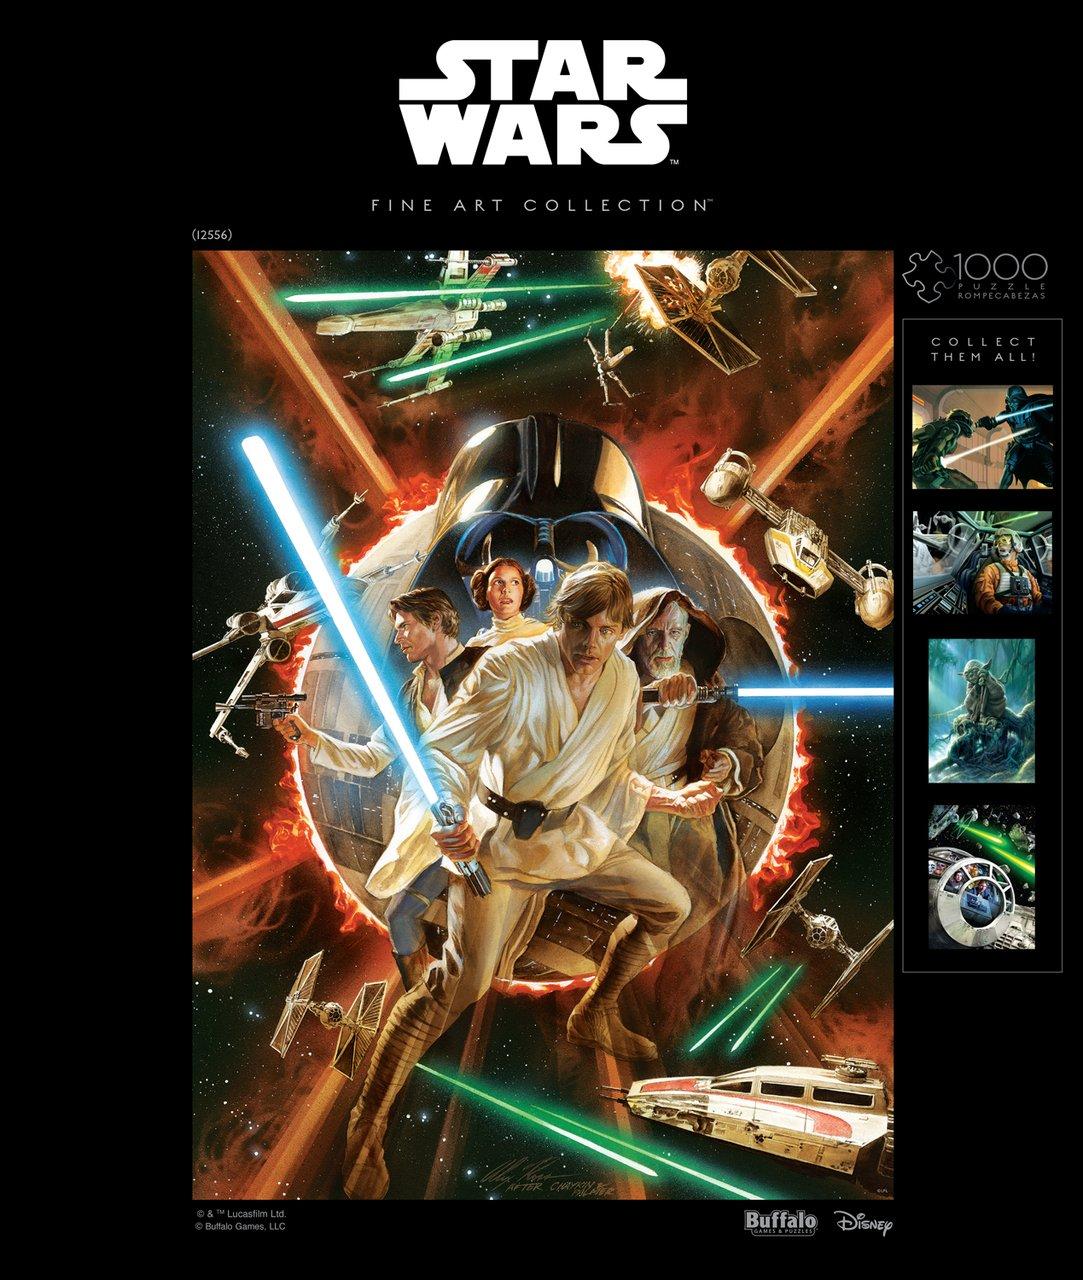 1 Buffalo Games 1000 Piece Puzzle Star Wars Fine Art Collection Episode 4 